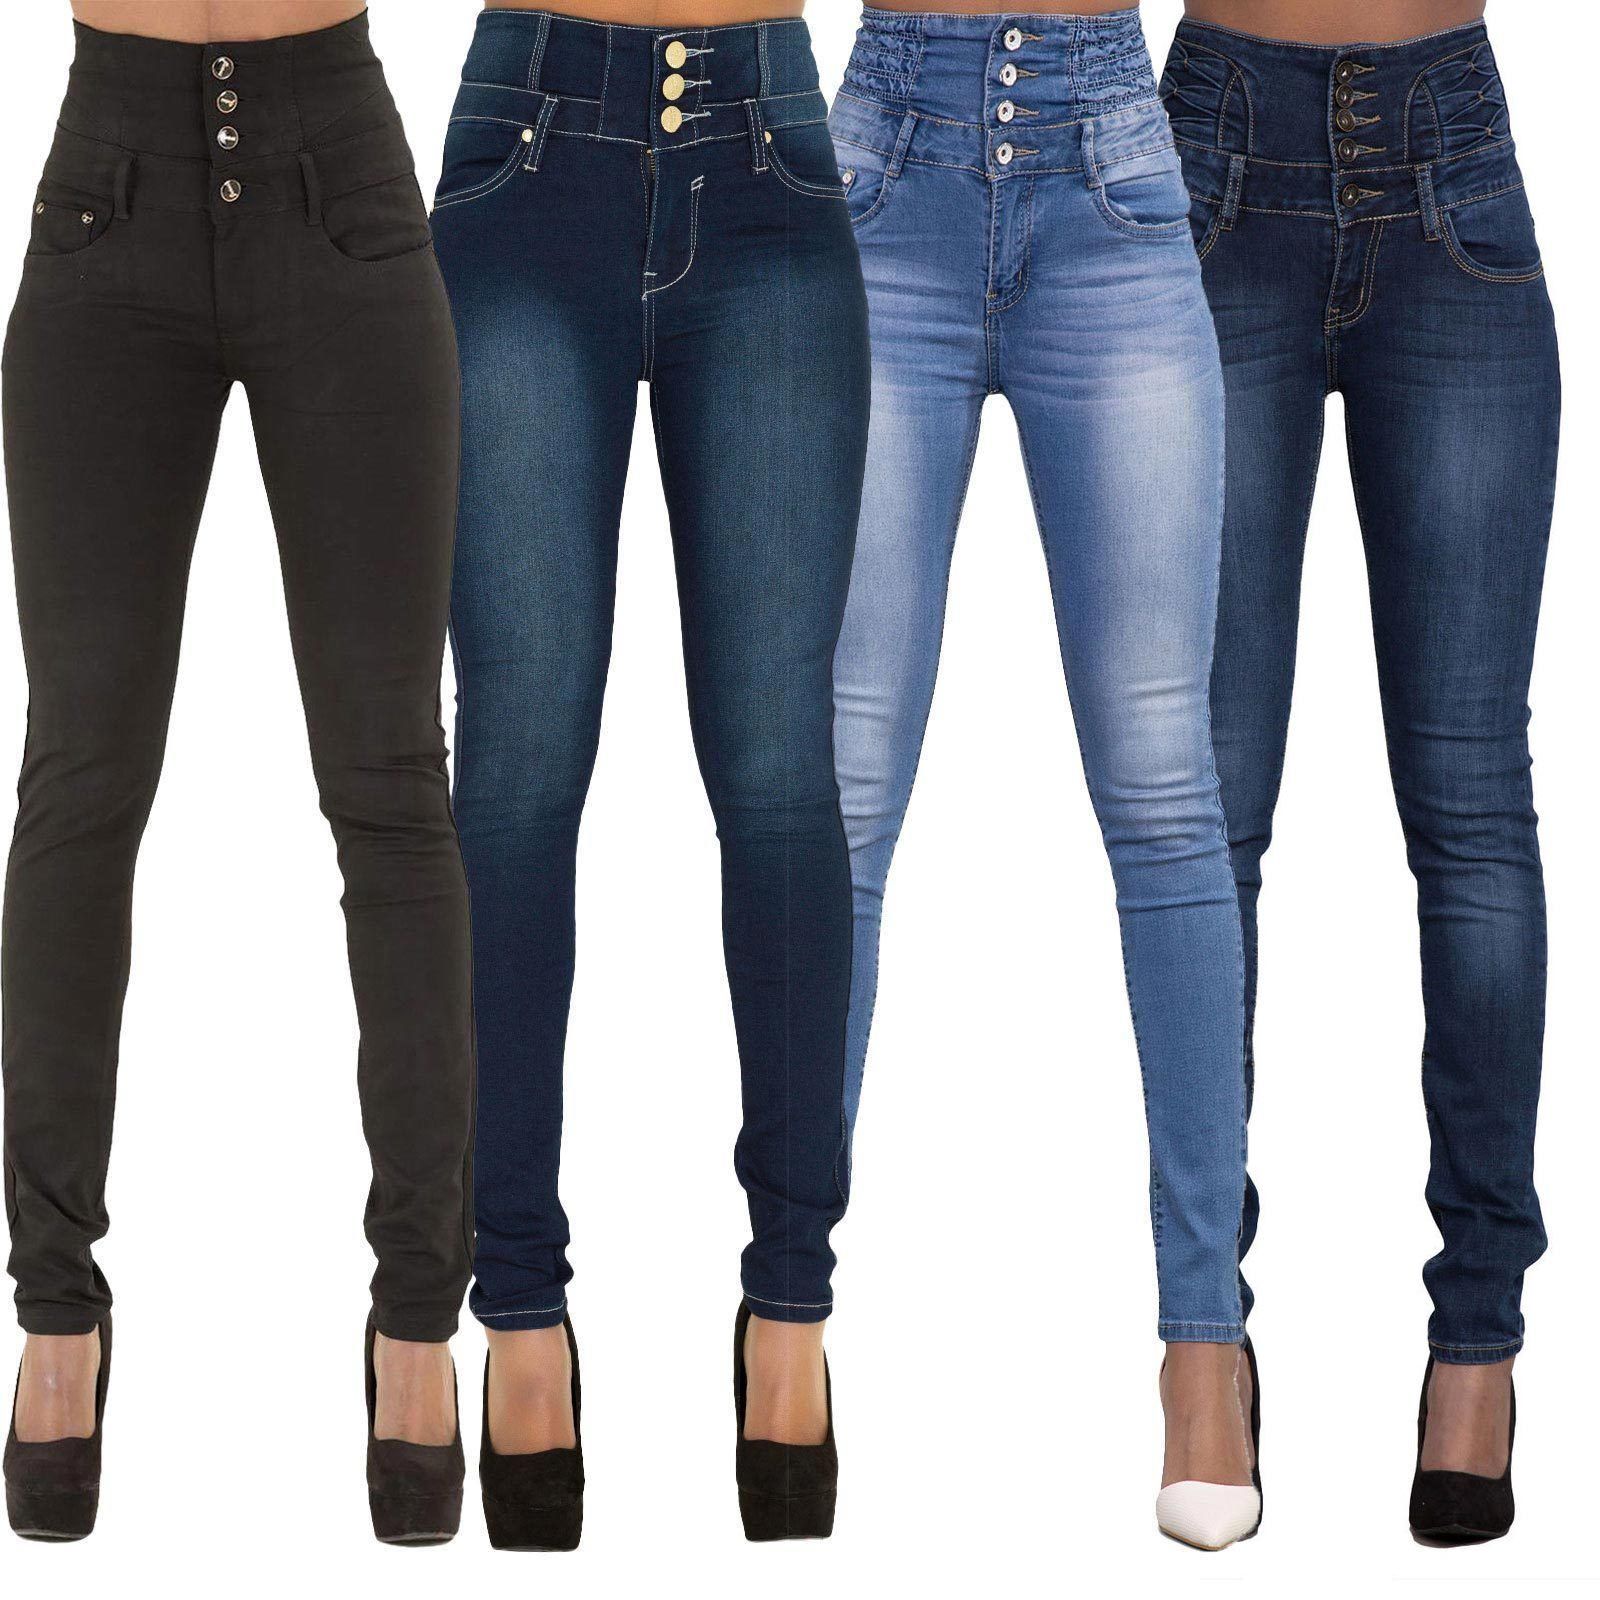 jeans pant and top for ladies